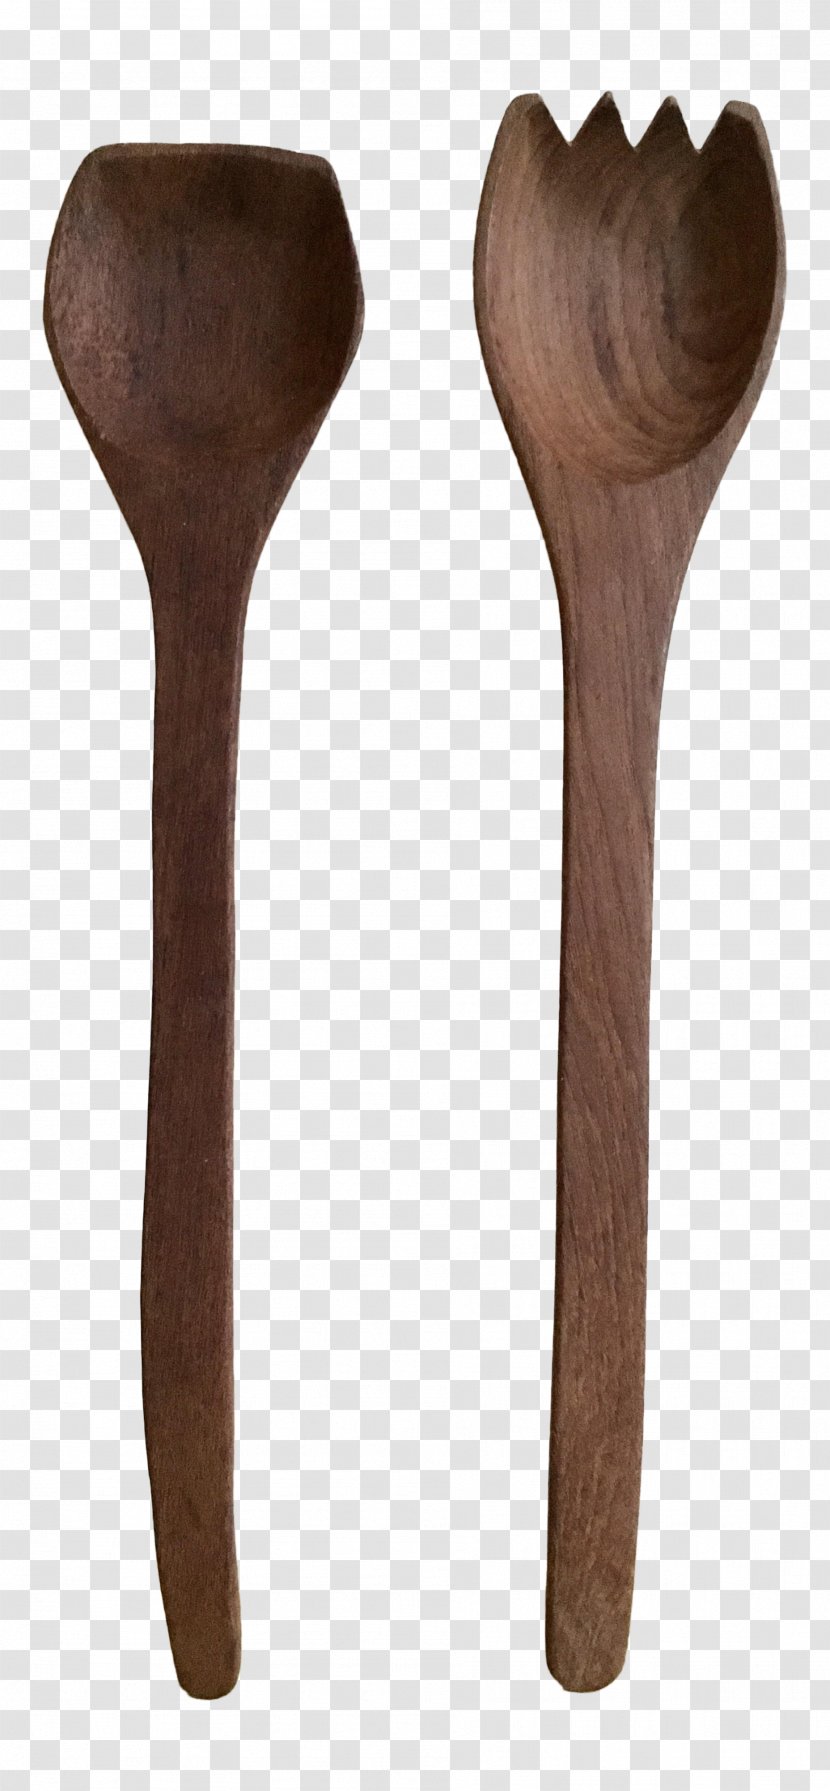 Wooden Spoon Product Design - Rustic And Fork Art Transparent PNG